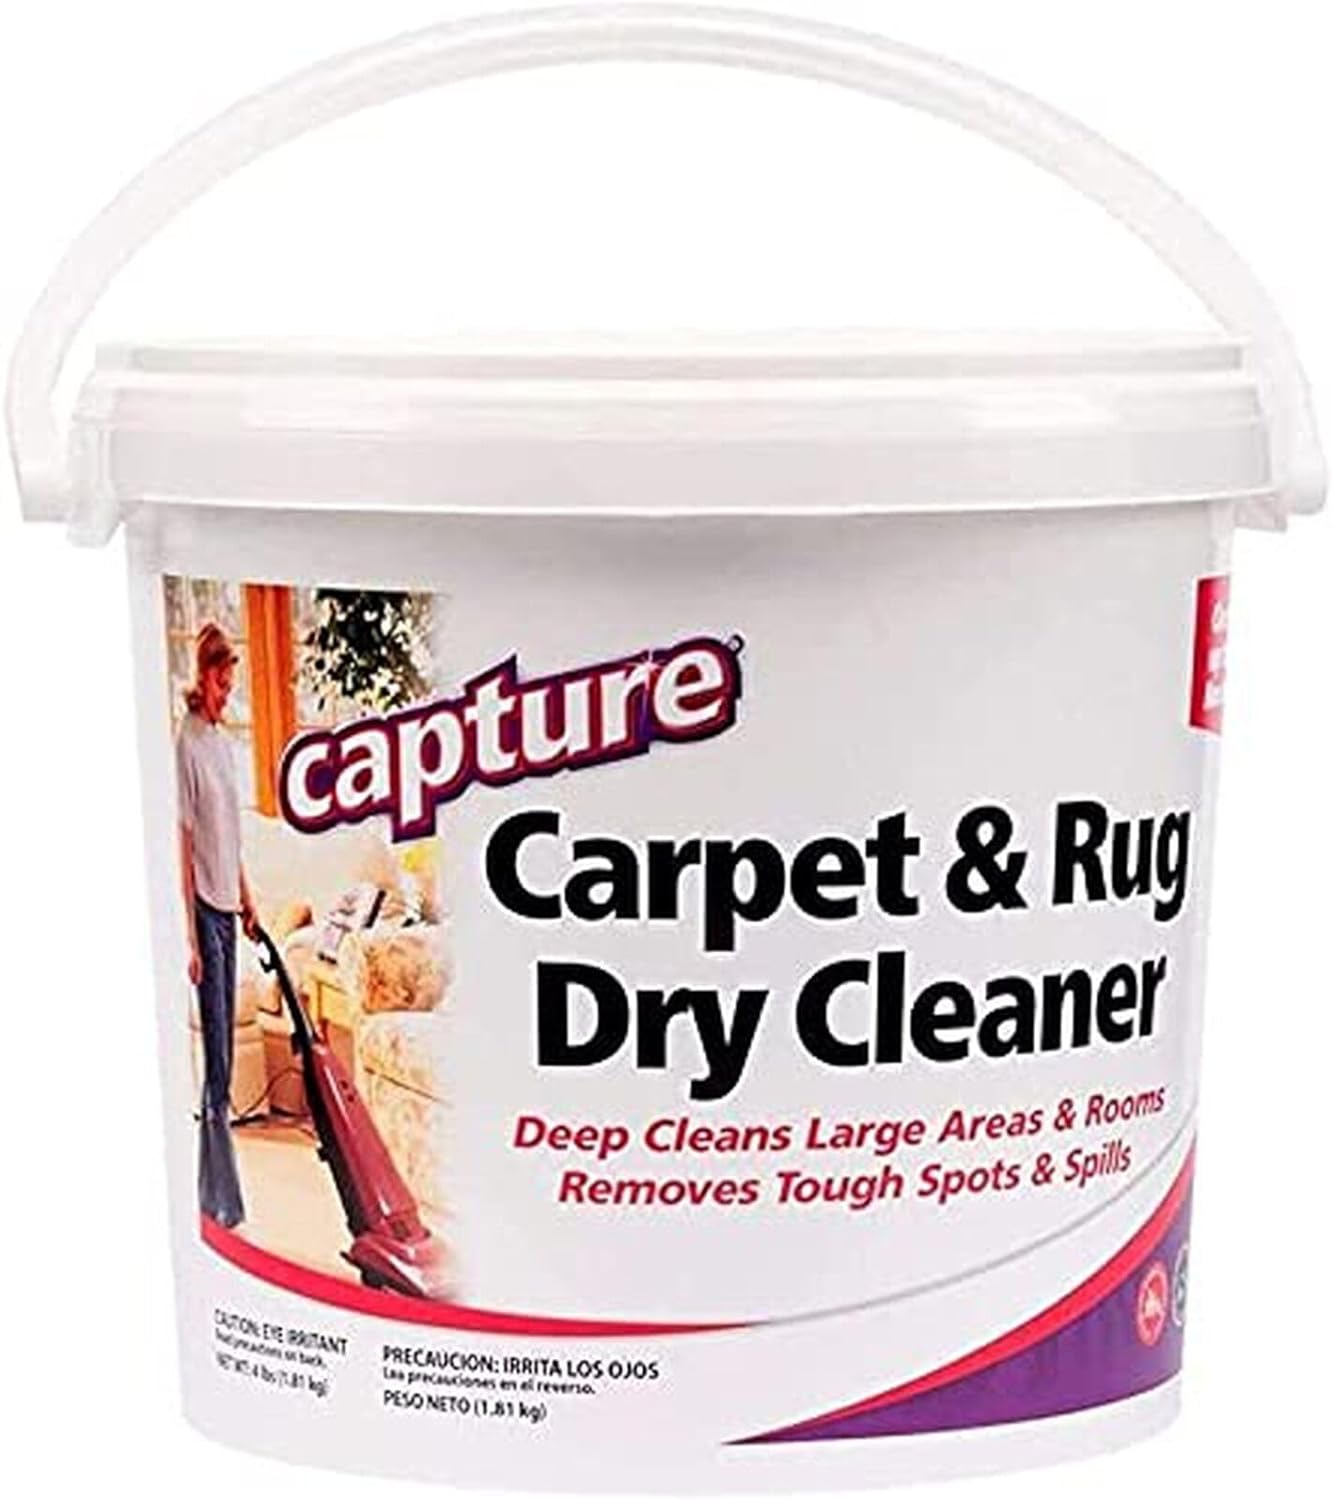 Capture Carpet Dry Cleaner Powder 4 lb - Deodorize Stains Smell Moisture from Rug Furniture Clothes and Fabric, Pet Stains Odor and Smoke Too - image 1 of 9